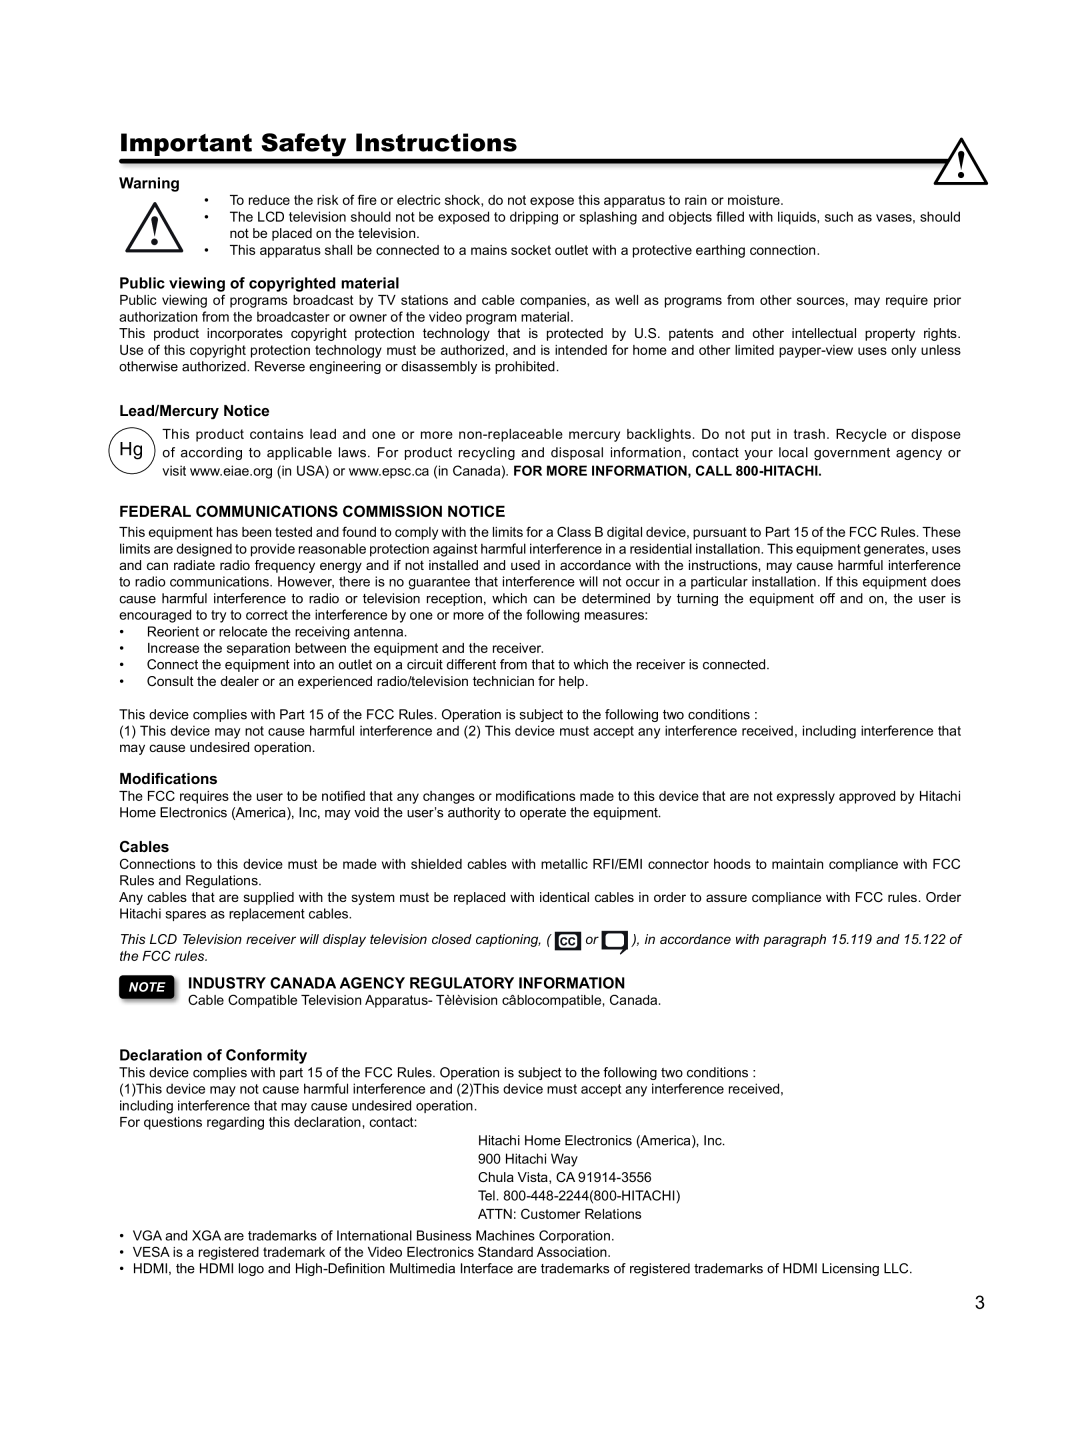 Hitachi L46S603 Important Safety Instructions, Public viewing of copyrighted material, Lead/Mercury Notice, Modiﬁcations 